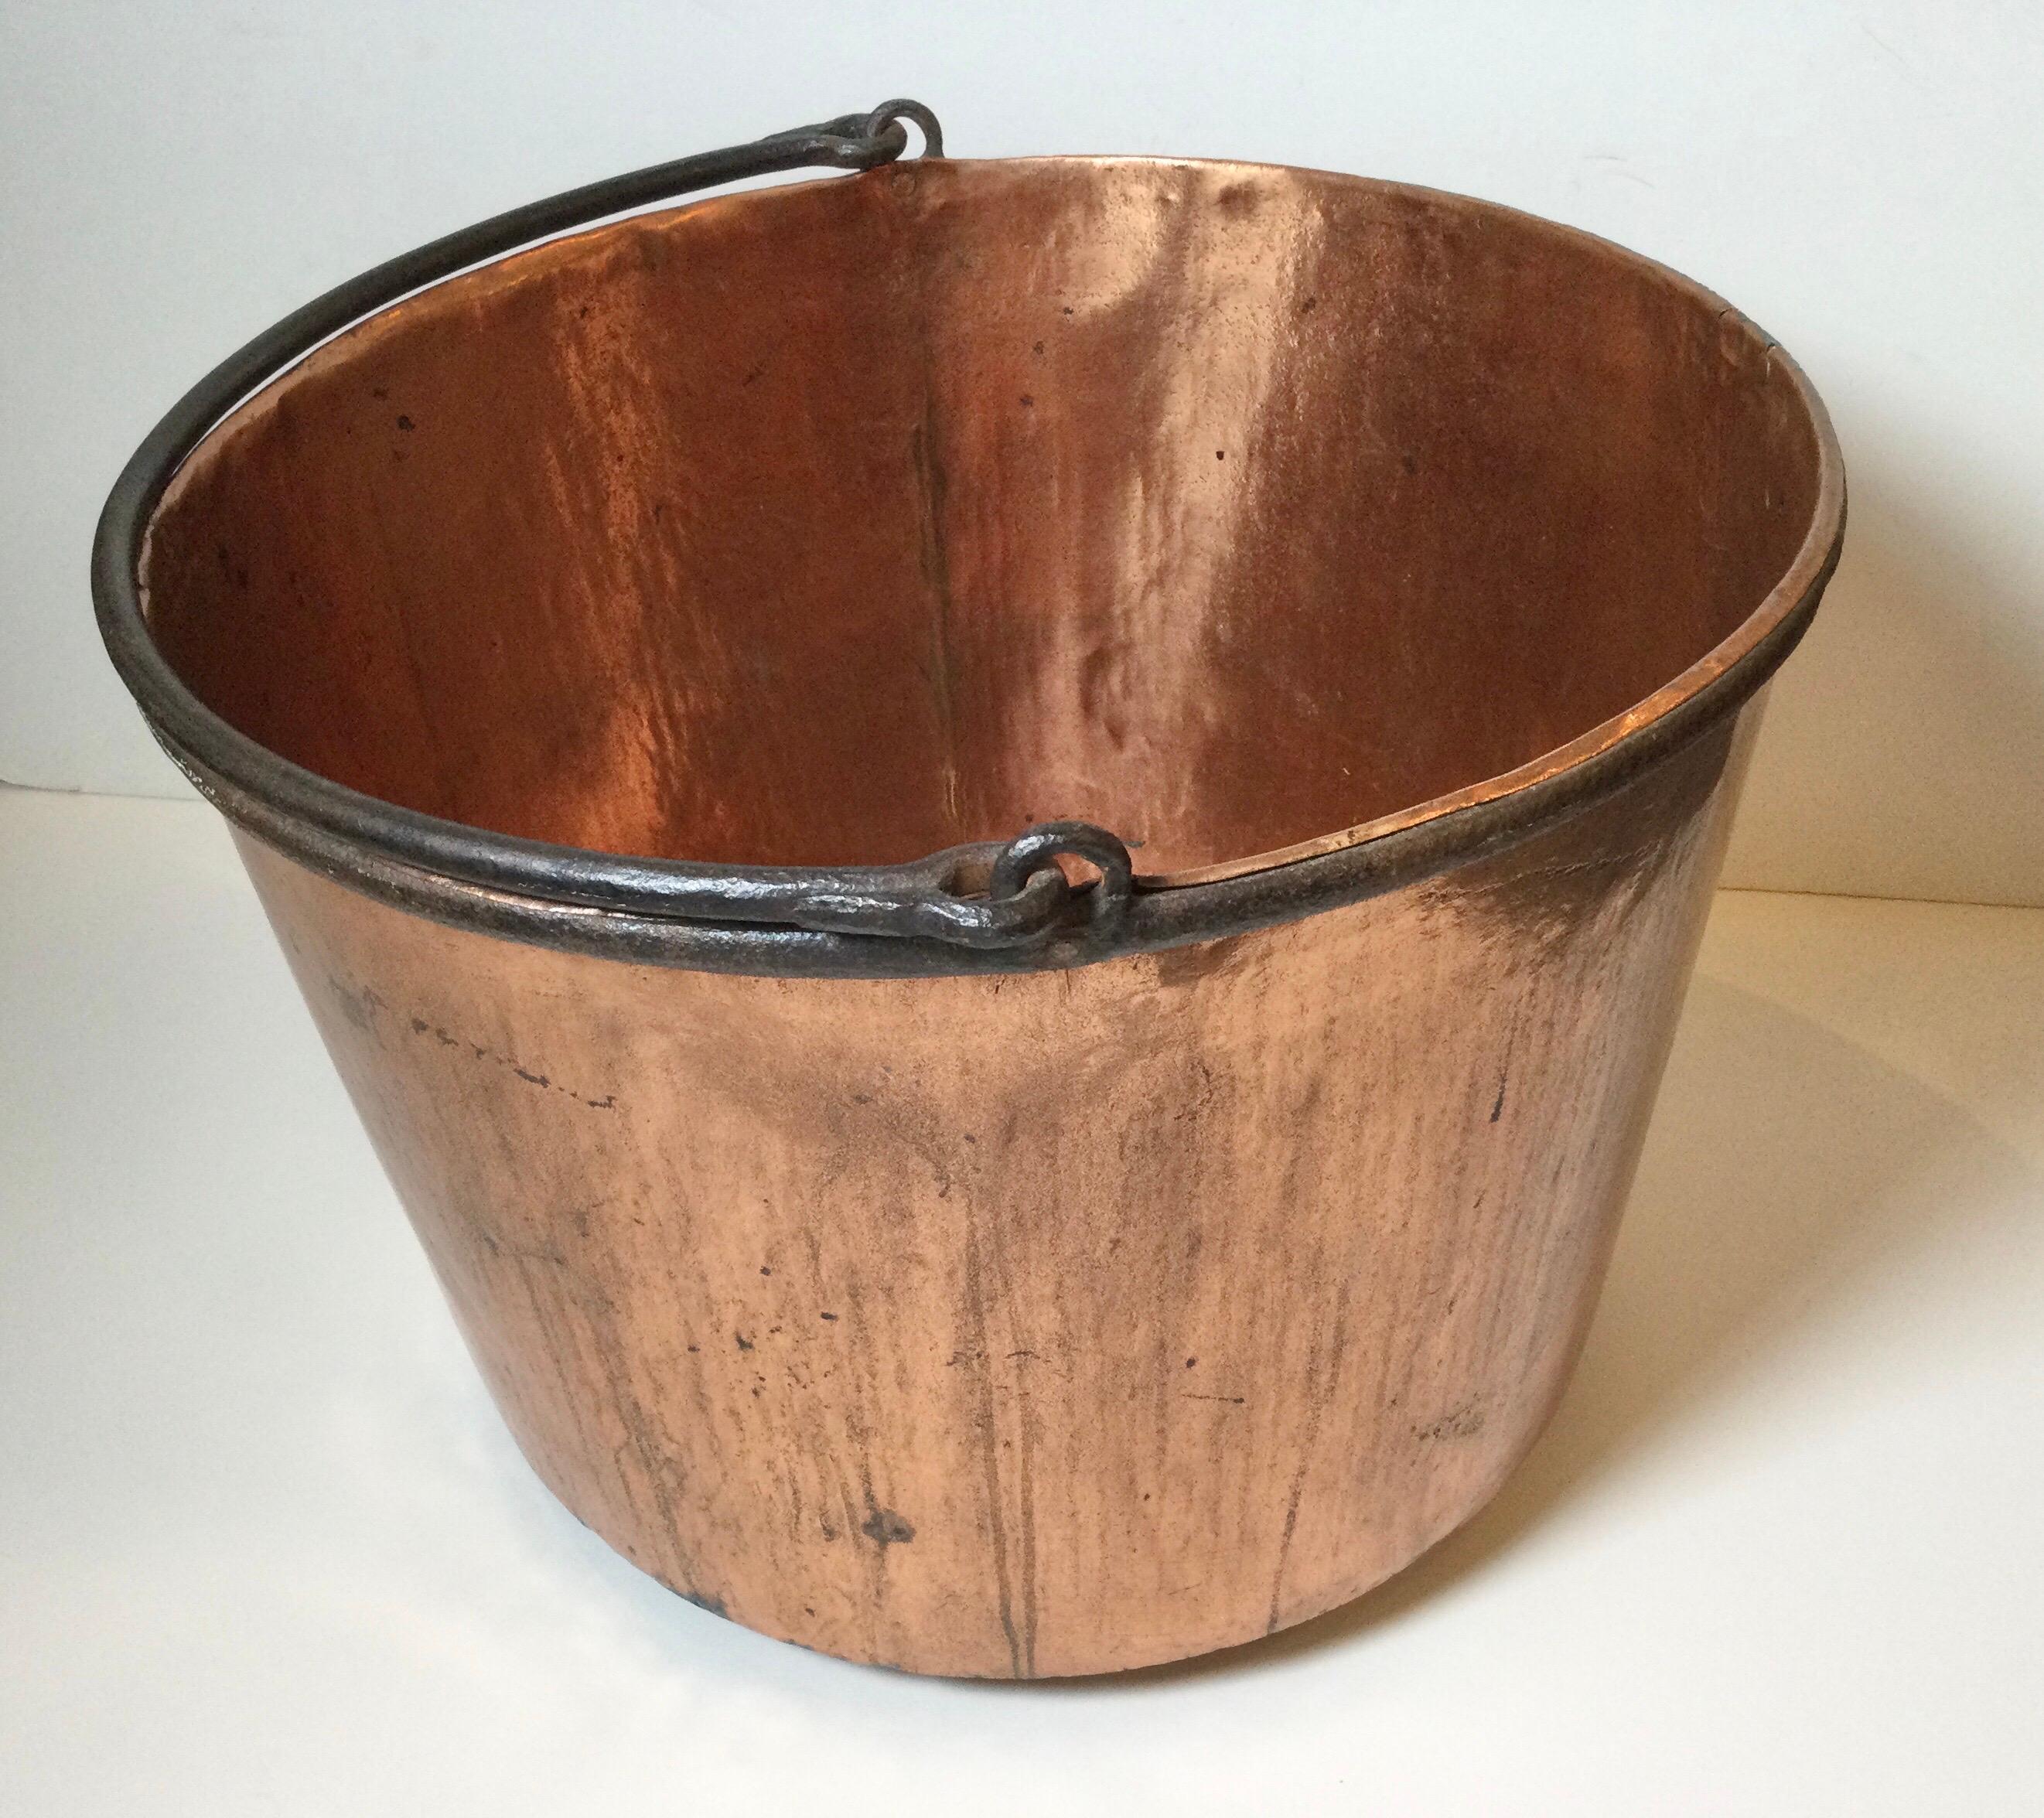 Large antique hand made copper and iron pot caldron with tong and groove construction. The handle and attachments made of hand forged iron.